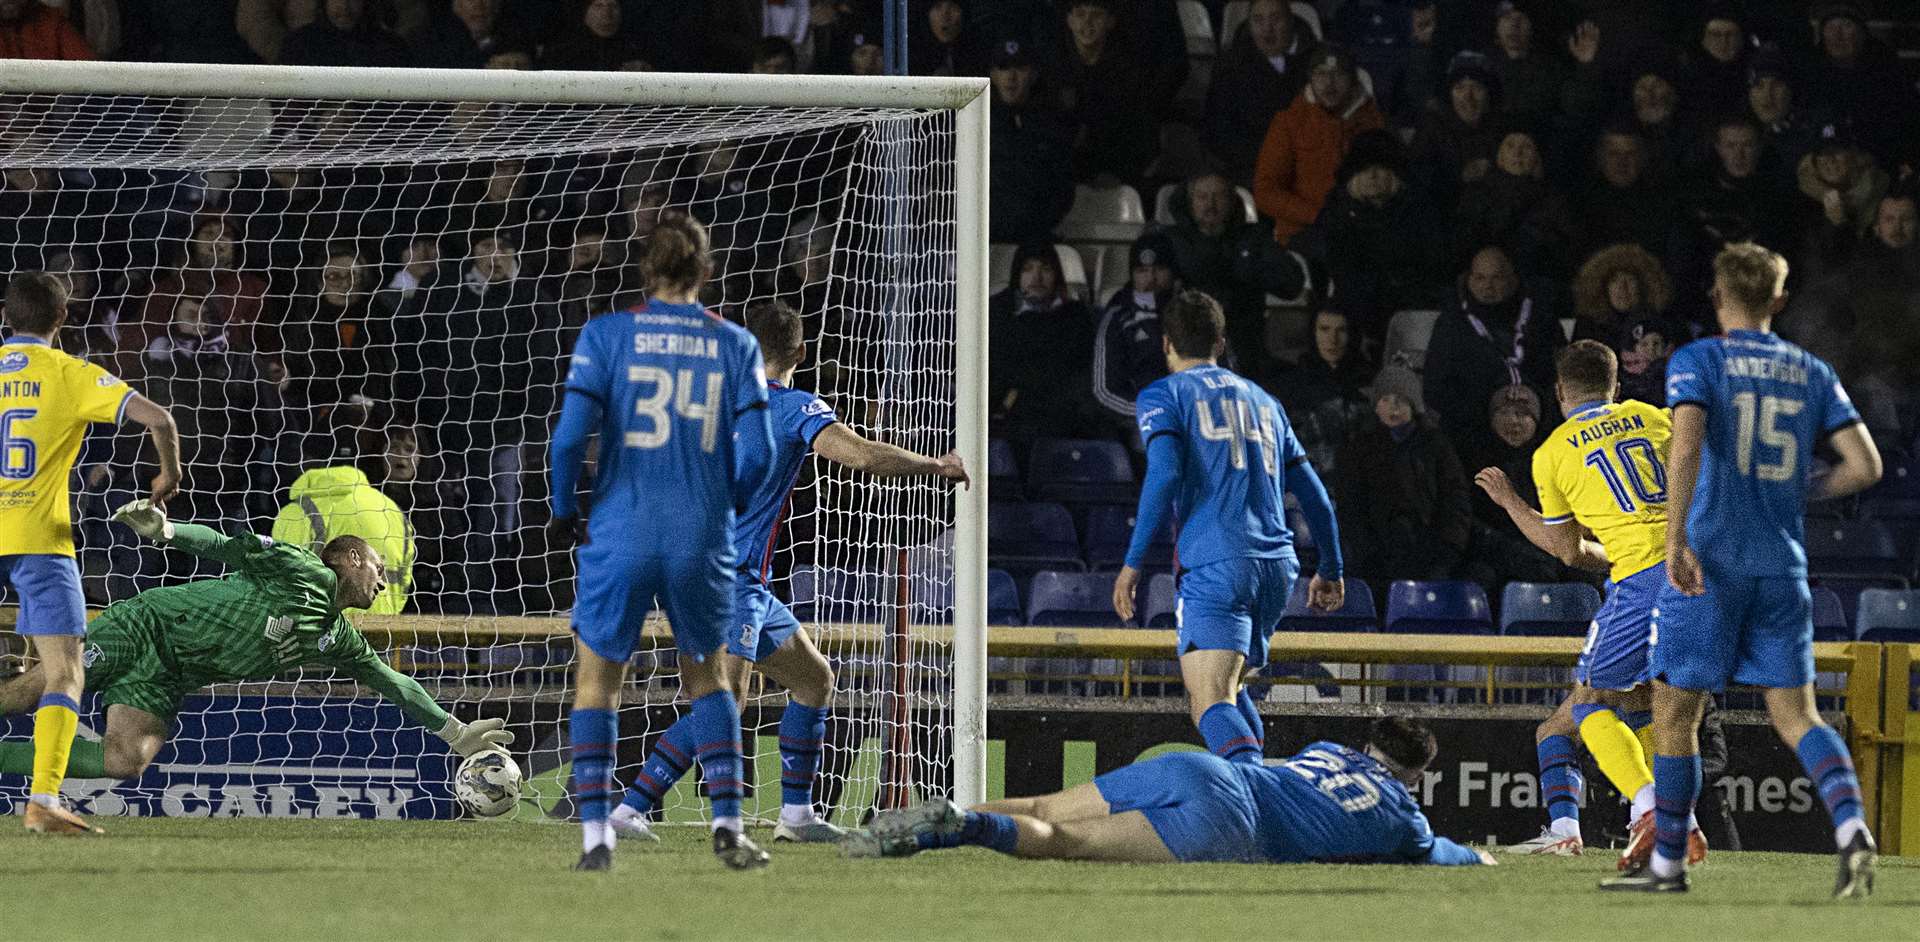 Raith’s Lewis Vaughan fires the equalising goal past Caley Thistle keeper Mark Ridgers.